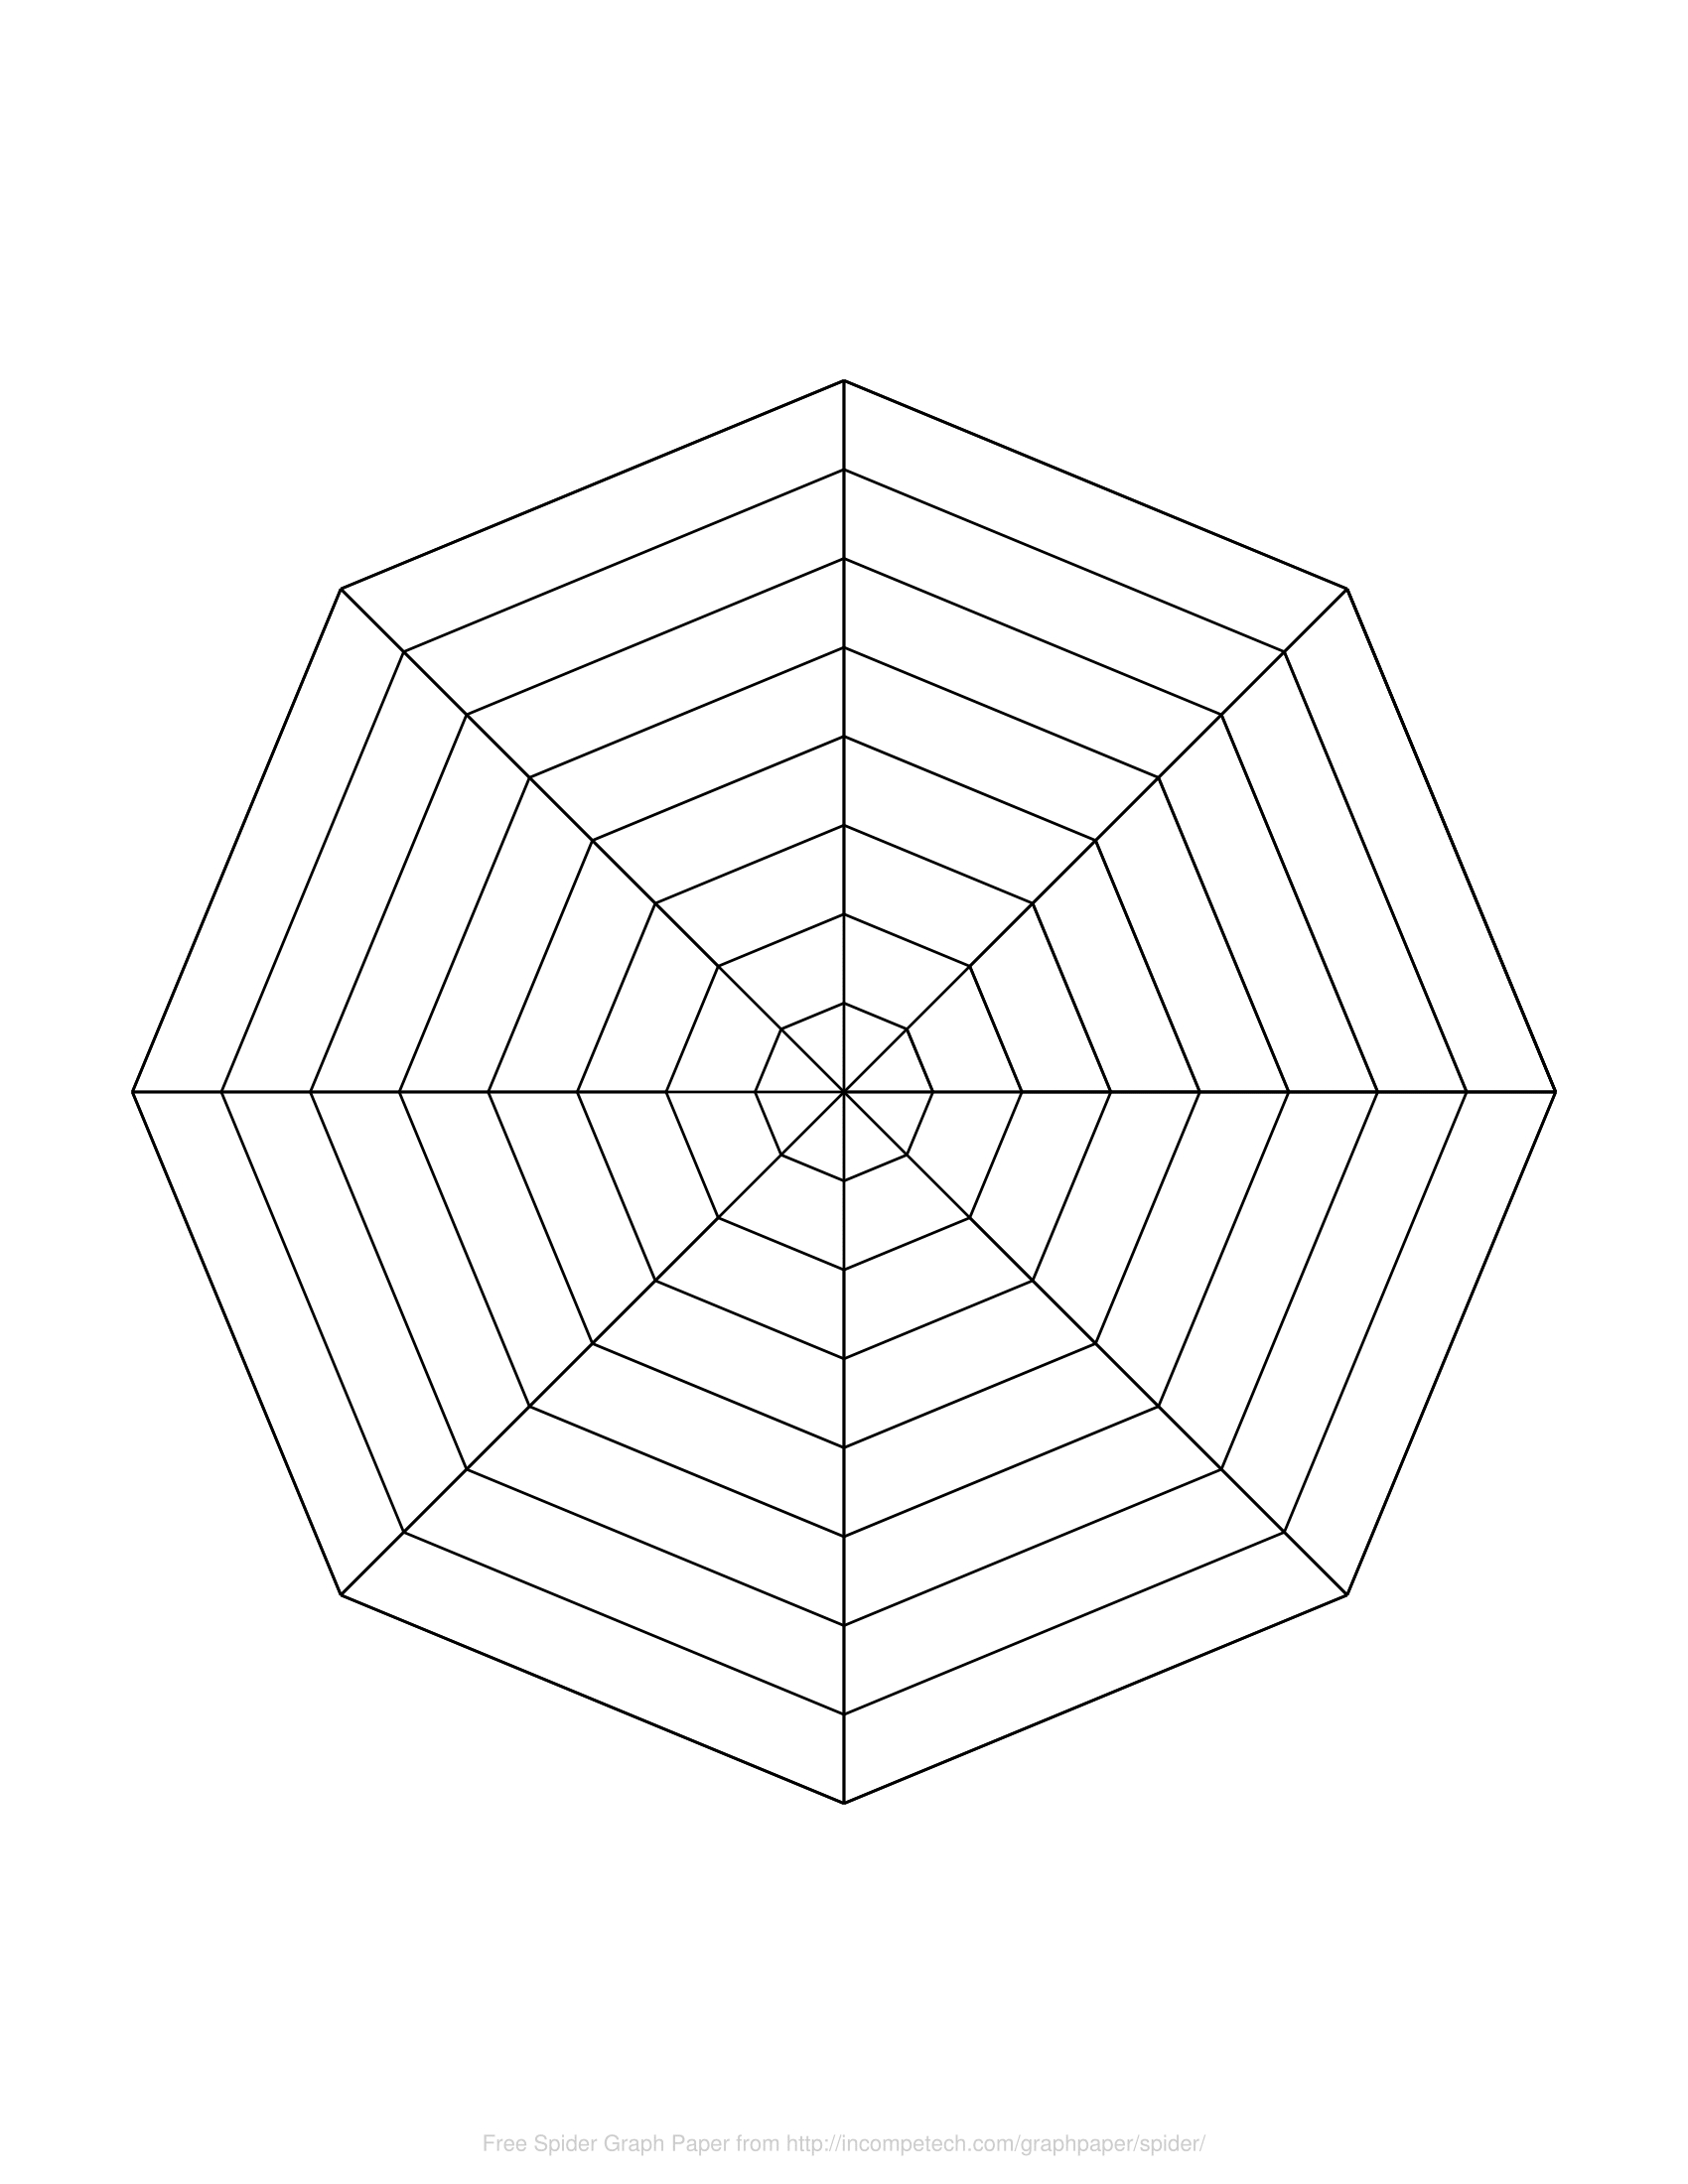 Free Online Graph Paper  Spider with Blank Radar Chart Template